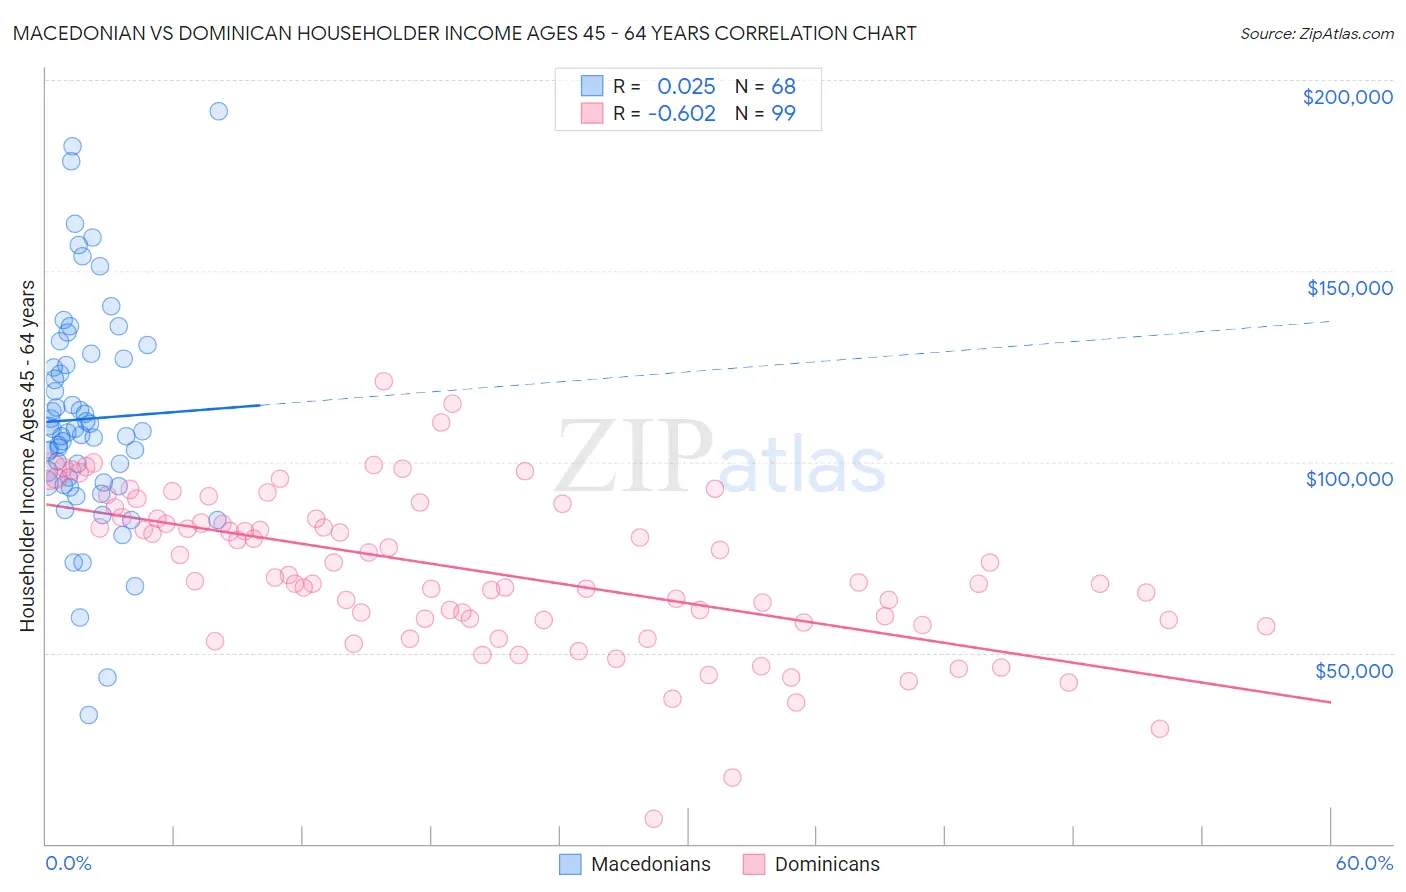 Macedonian vs Dominican Householder Income Ages 45 - 64 years